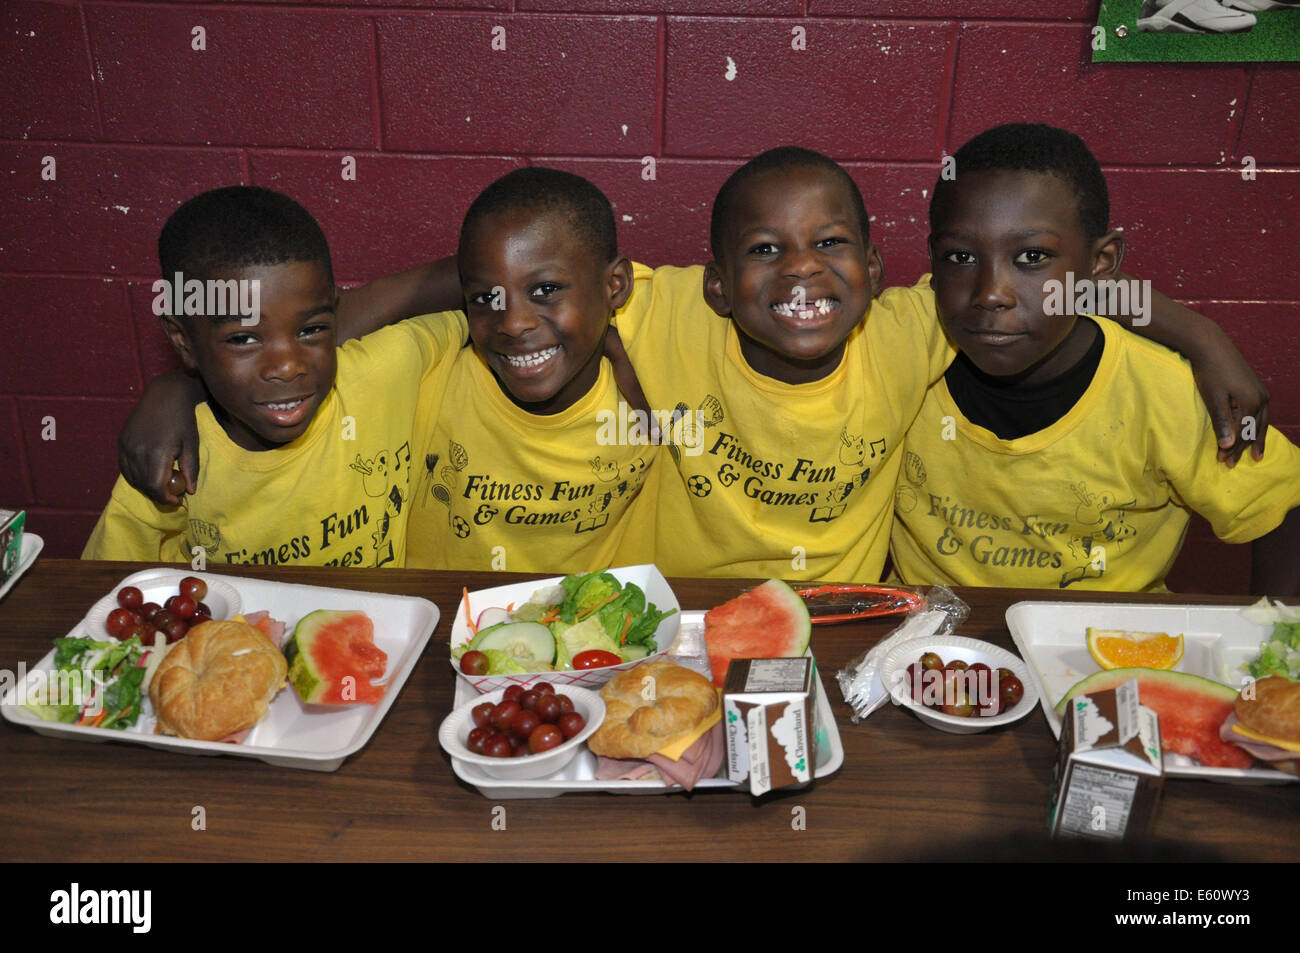 Students at Hamilton Elementary Middle School enjoy the Summer Food Service Program providing healthy meals in the summer months to reduce the impacts of poverty July 11, 2014 in Baltimore, Maryland. Stock Photo